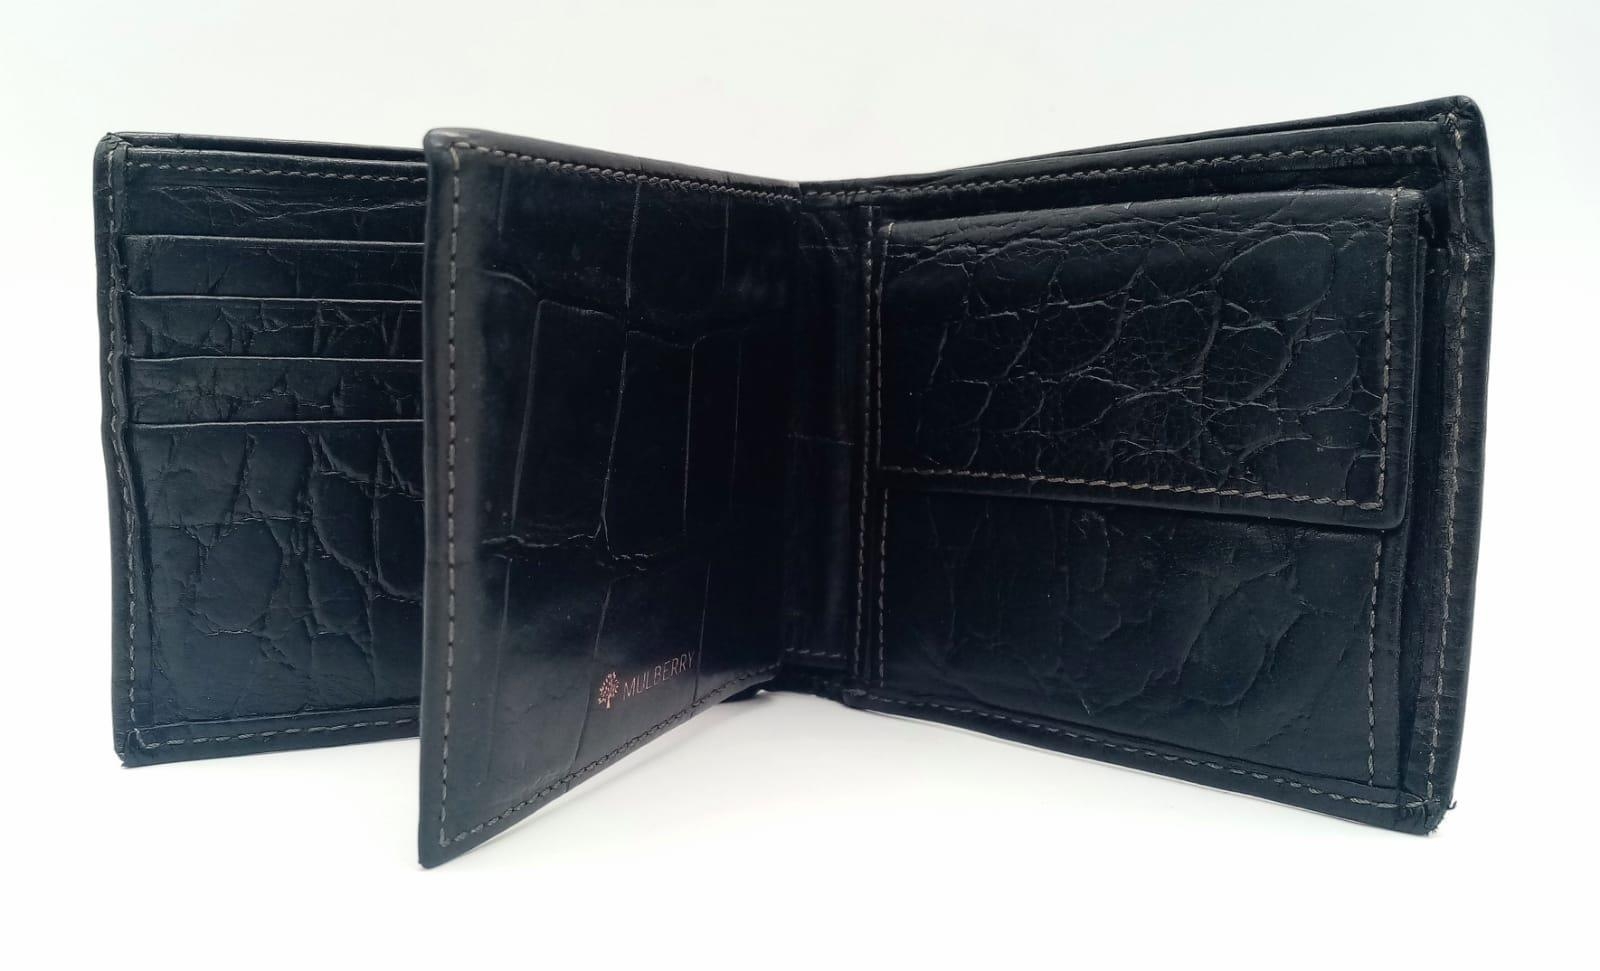 A black leather Mulberry wallet, can hold up to 8 cards, includes a coin pouch. Size approx. 11x9cm. - Image 2 of 6